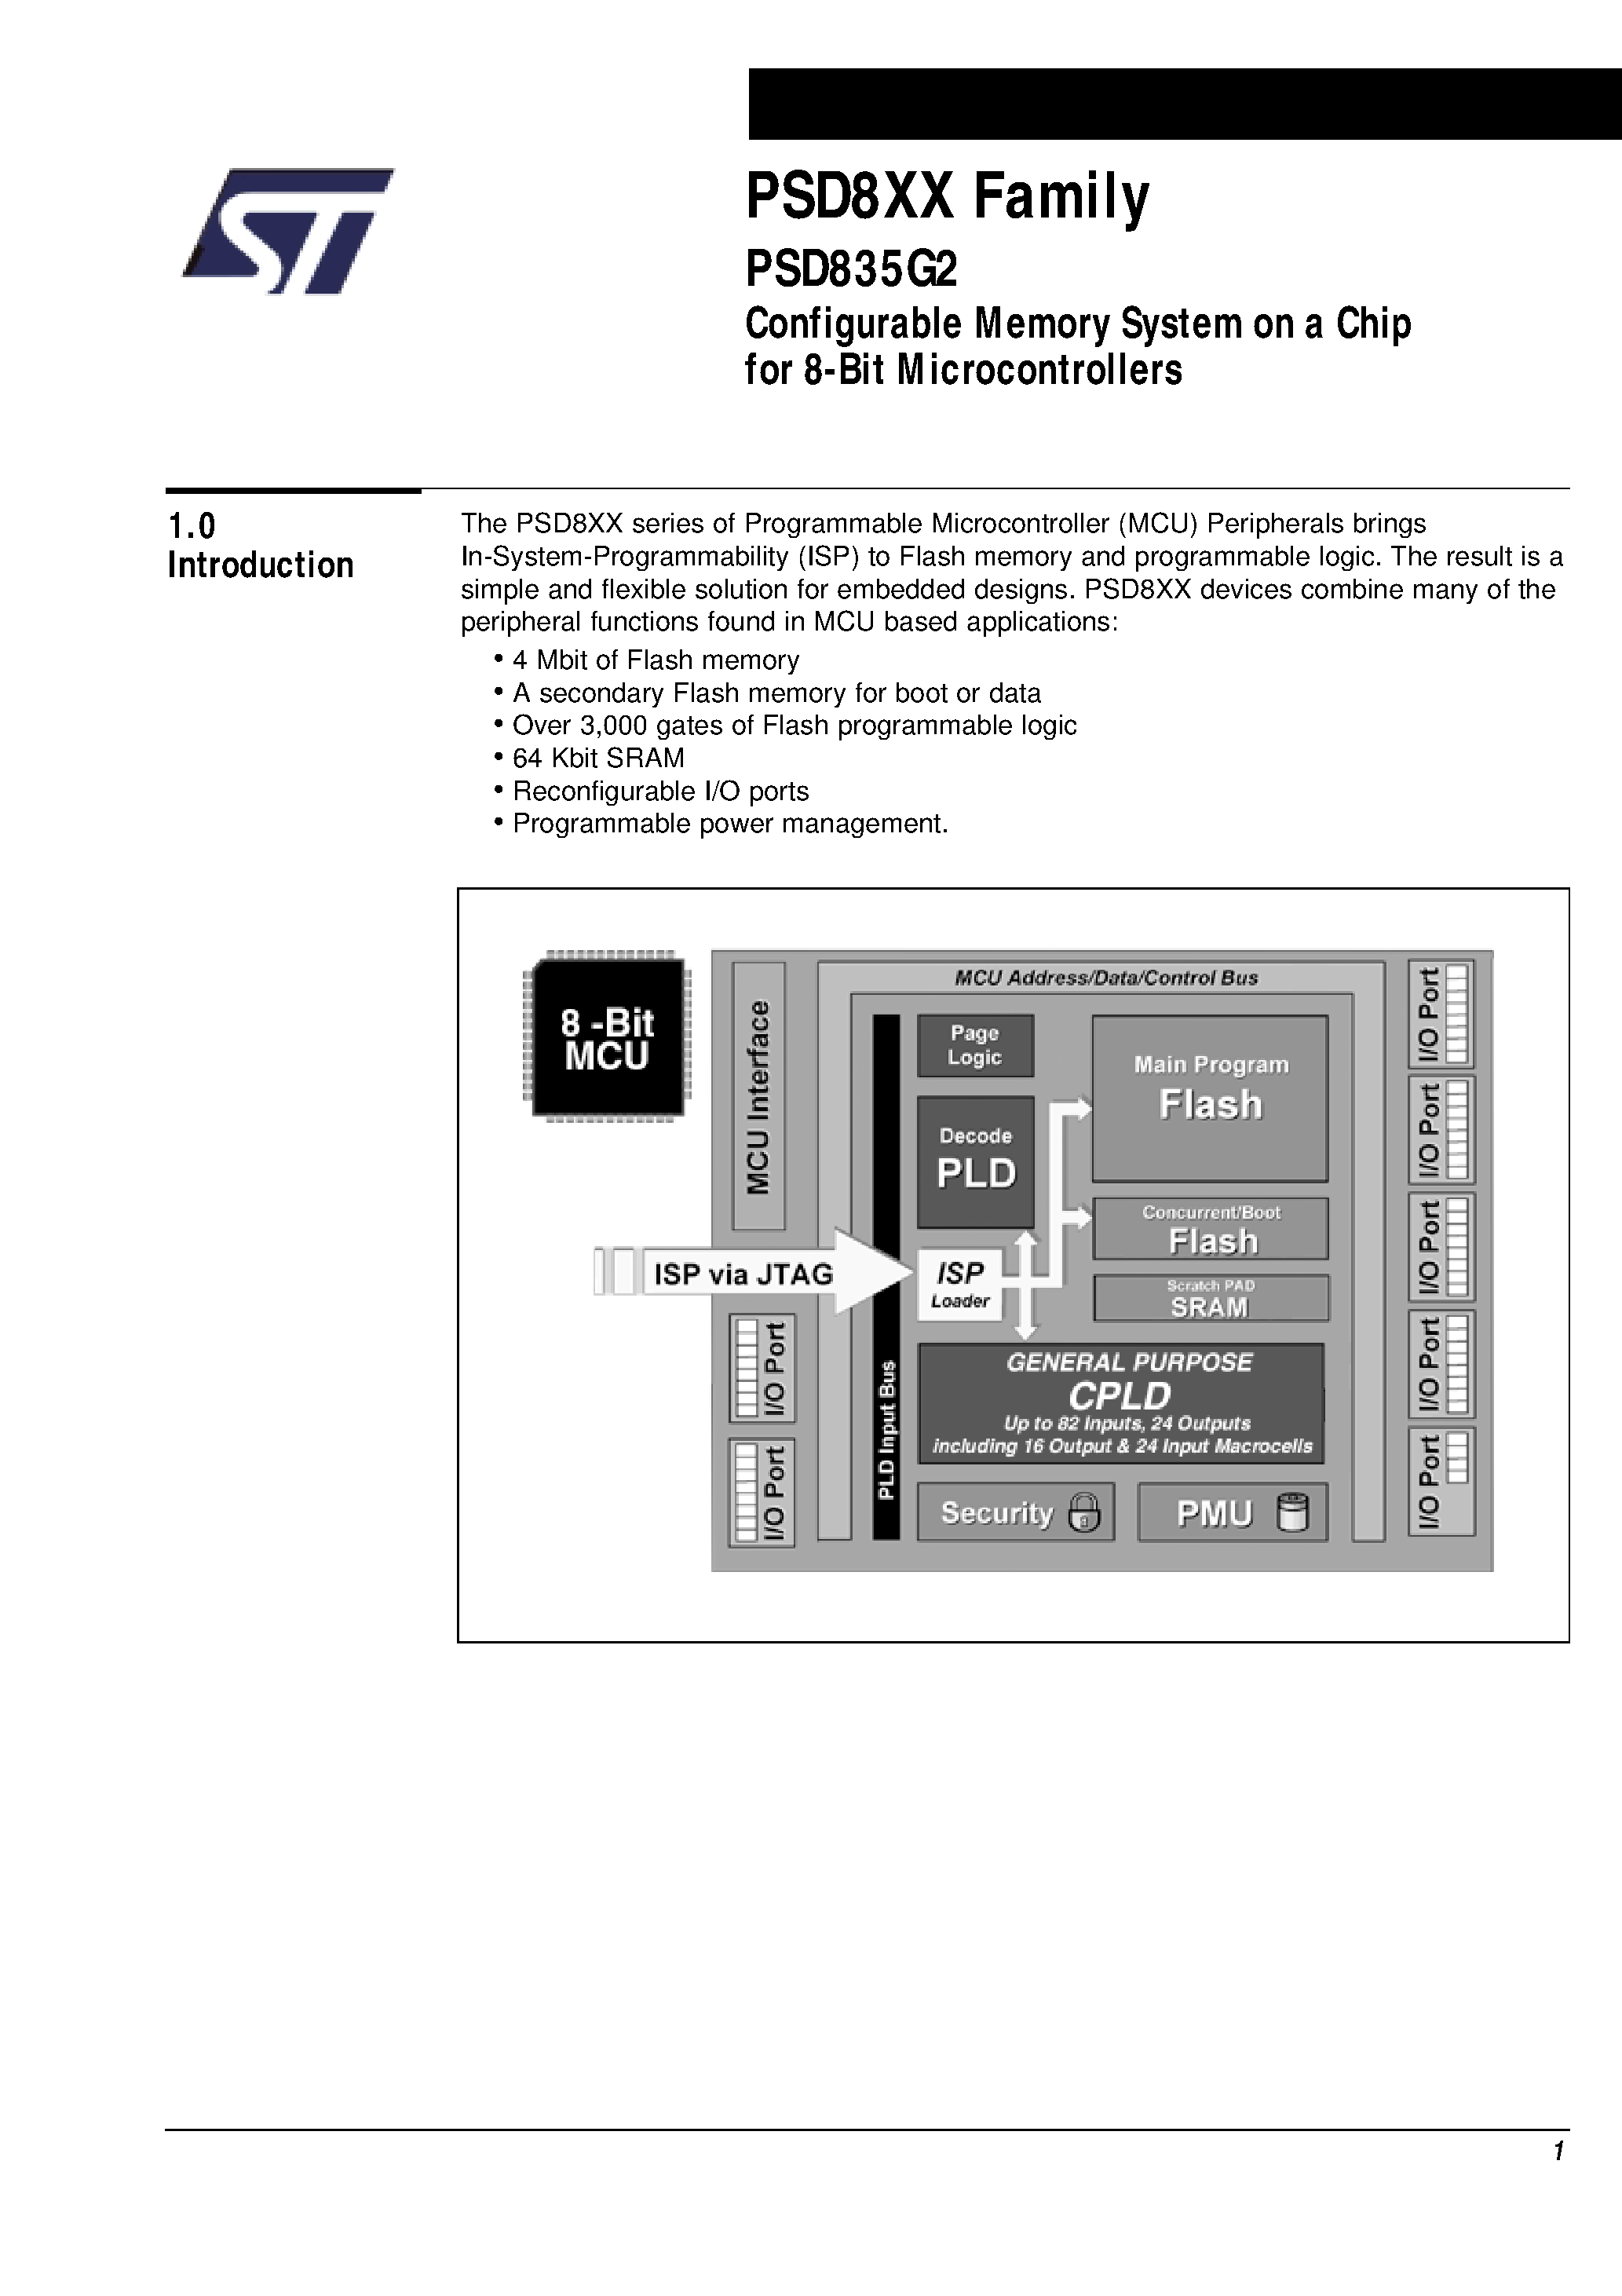 Datasheet PSD835F1-A-20J - Configurable Memory System on a Chip for 8-Bit Microcontrollers page 2